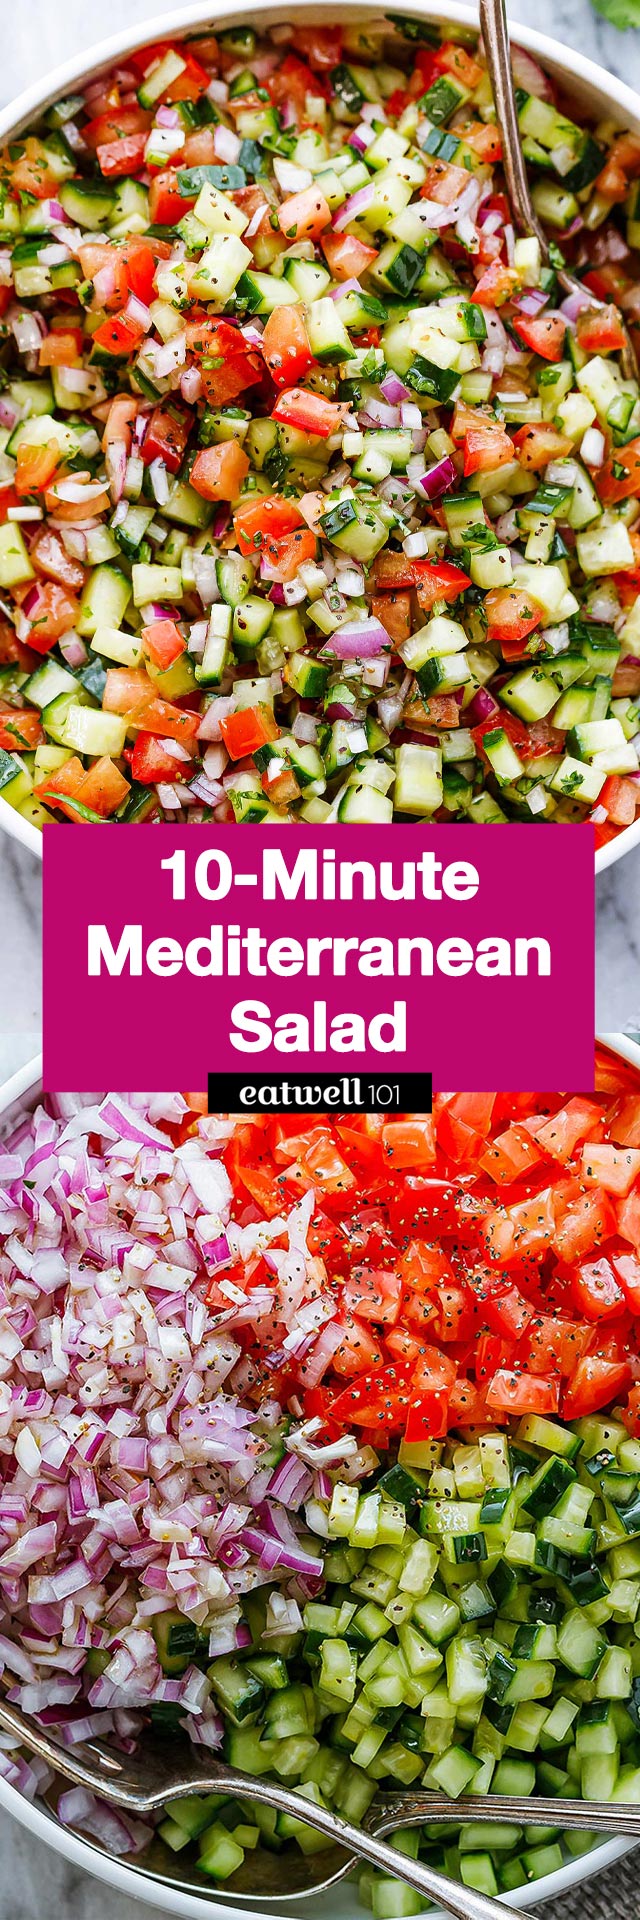 Mediterranean salad recipe - #salad #recipe #eatwell101 - This easy Mediterranean salad recipe works as a side dish but also makes a vegetarian meal on its own. CLICK HERE to Get the Recipe